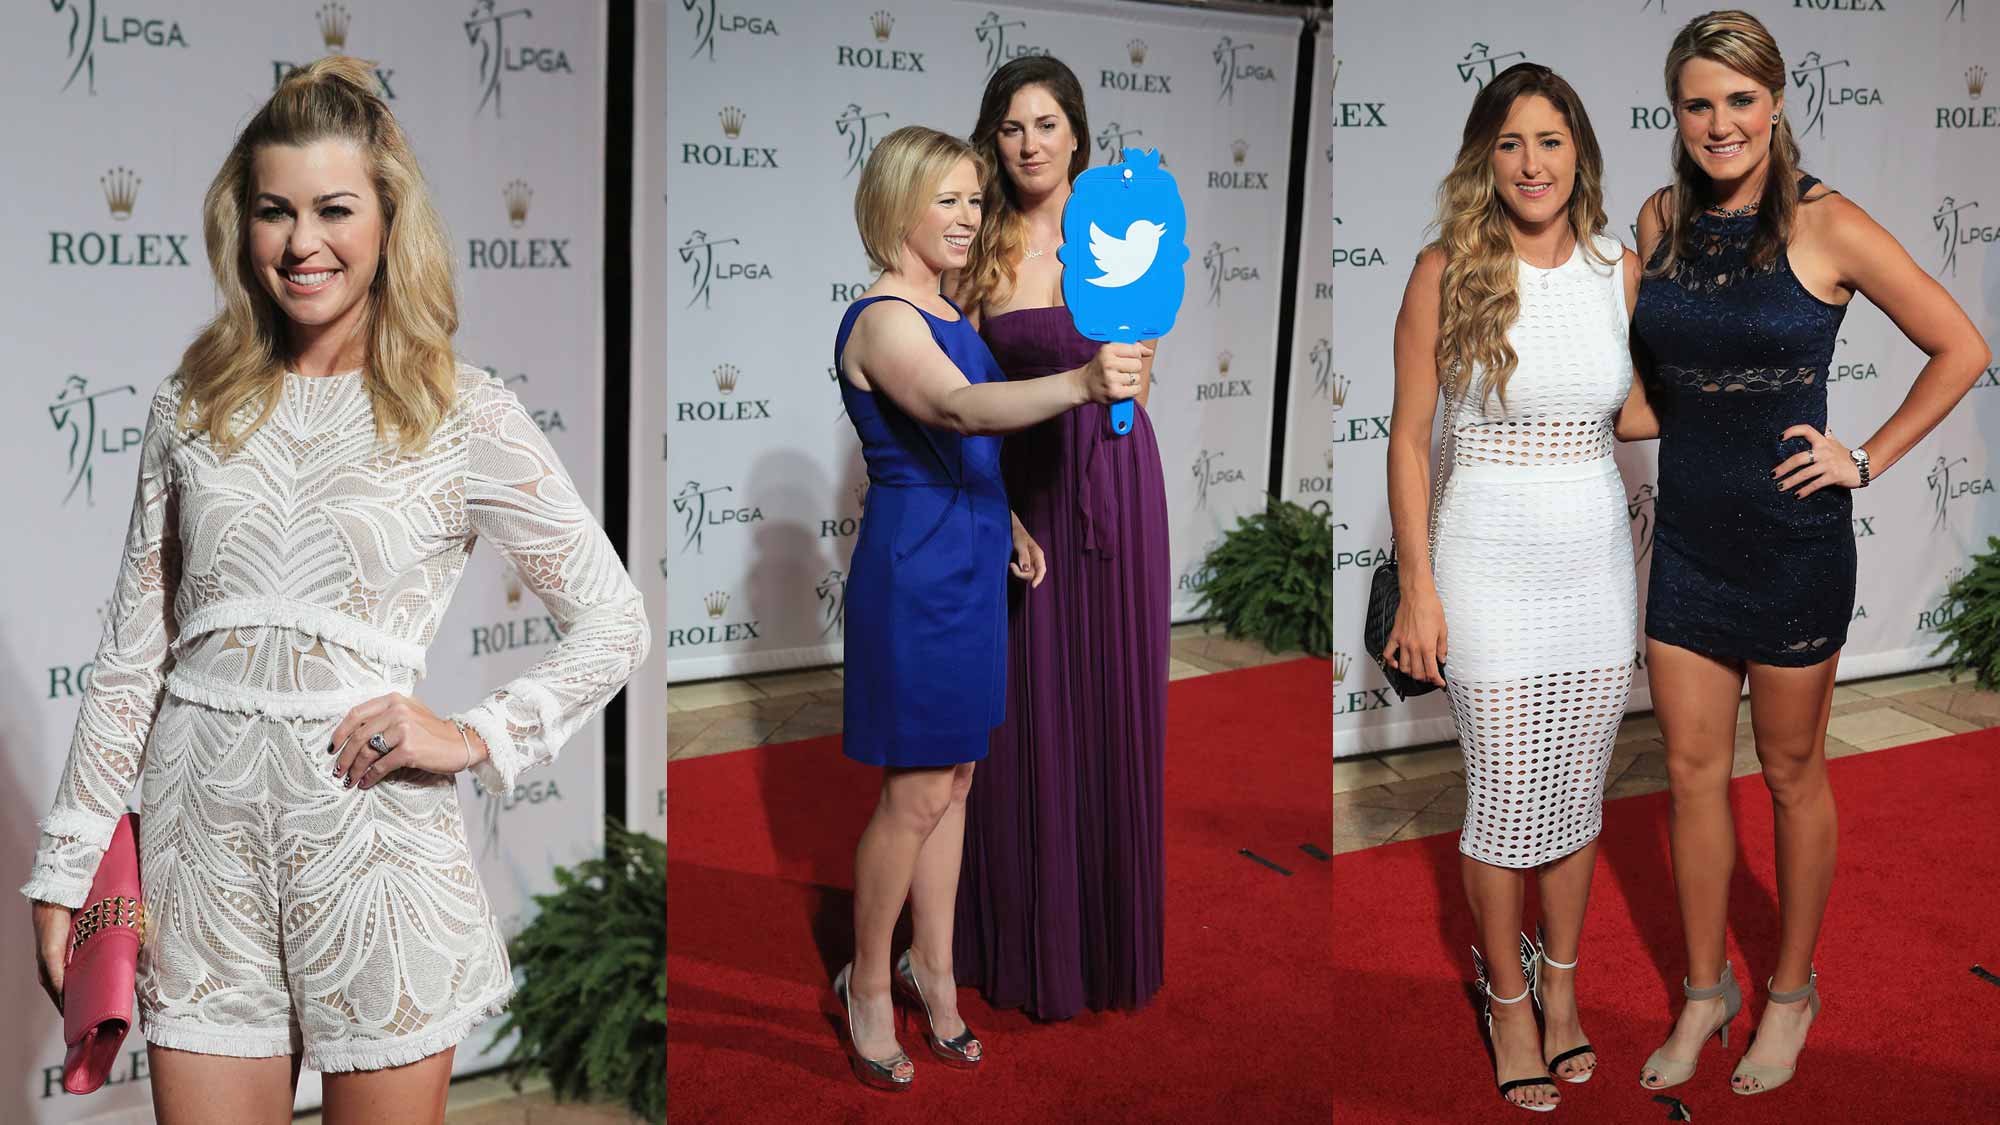 Left to Right: Paula Creamer, Morgan Pressel, Sandra Gal, Jaye Marie Green, and Lexi Thompson pose on the red carpet before the LPGA Rolex Players Awards at the Ritz-Carlton, Naples